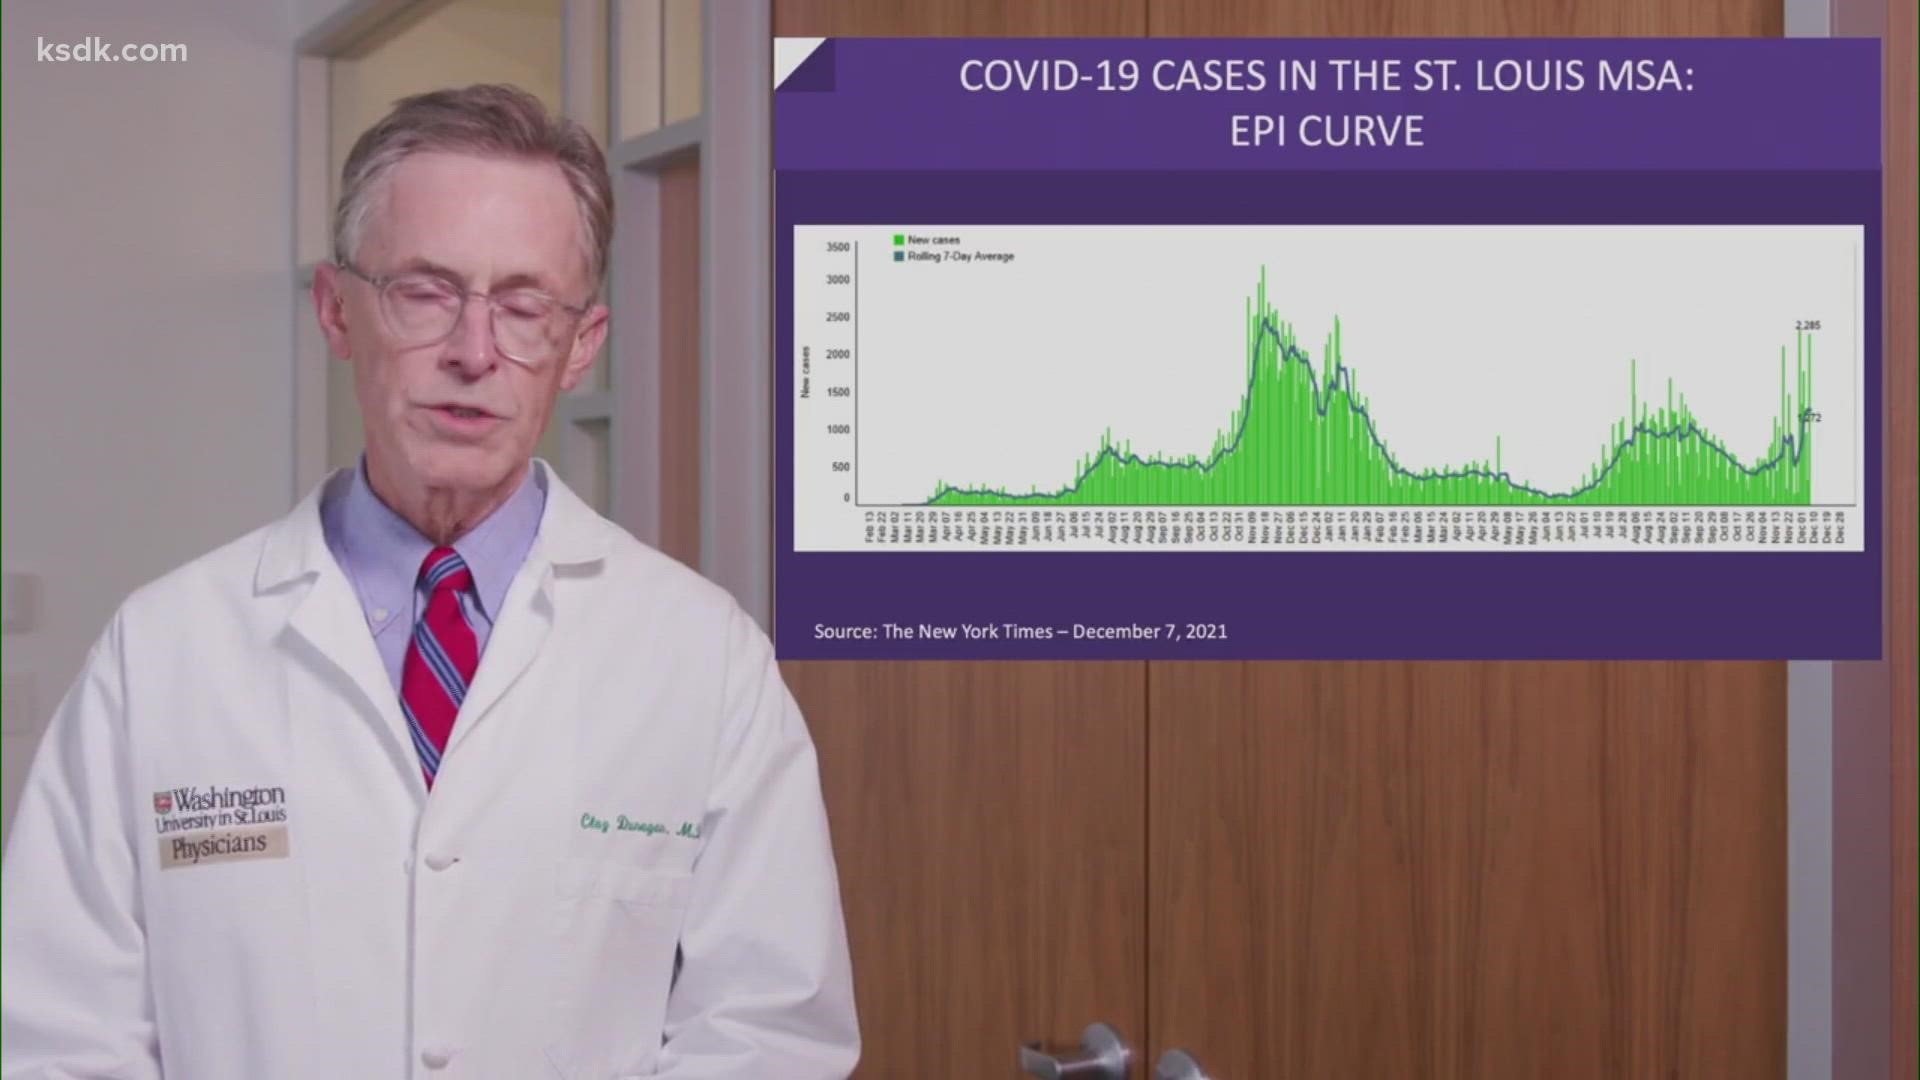 Dr. Clay Dunagan with the St. Louis Metropolitan Pandemic Task Force released new data on COVID-19 cases, hospitalizations and trends at area hospitals.